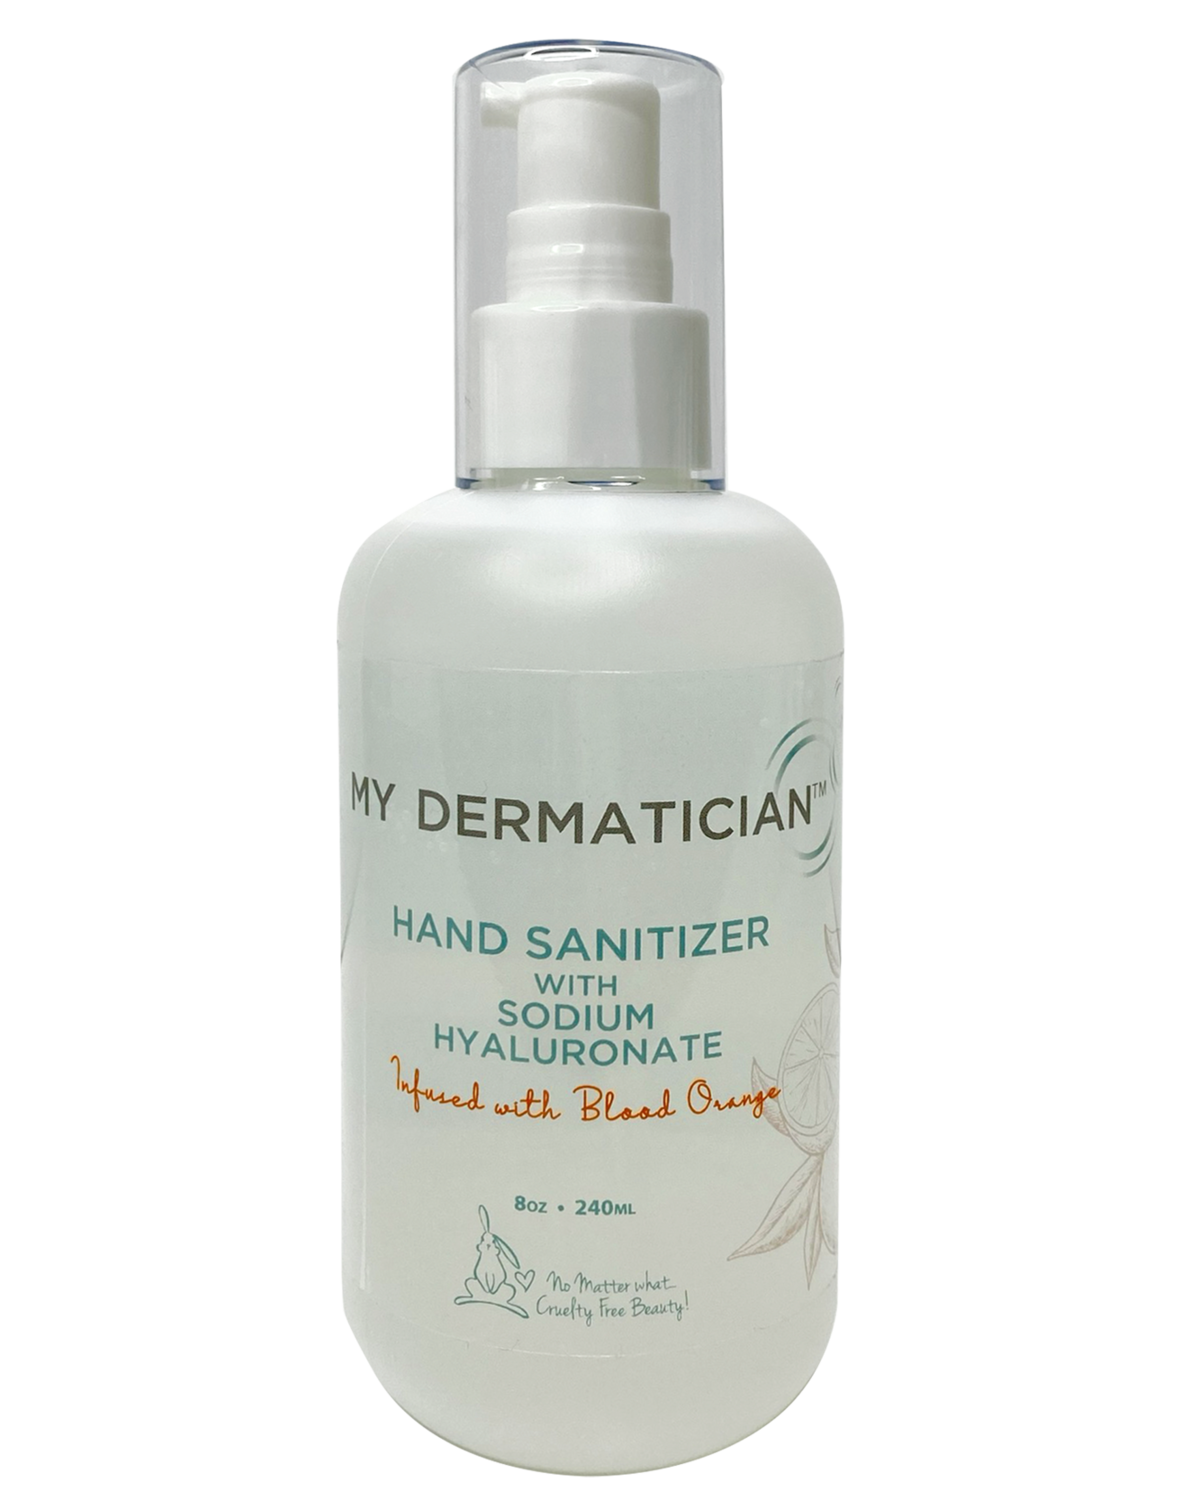 My Dermatician Hand Sanitizer 8oz infused with Blood Orange